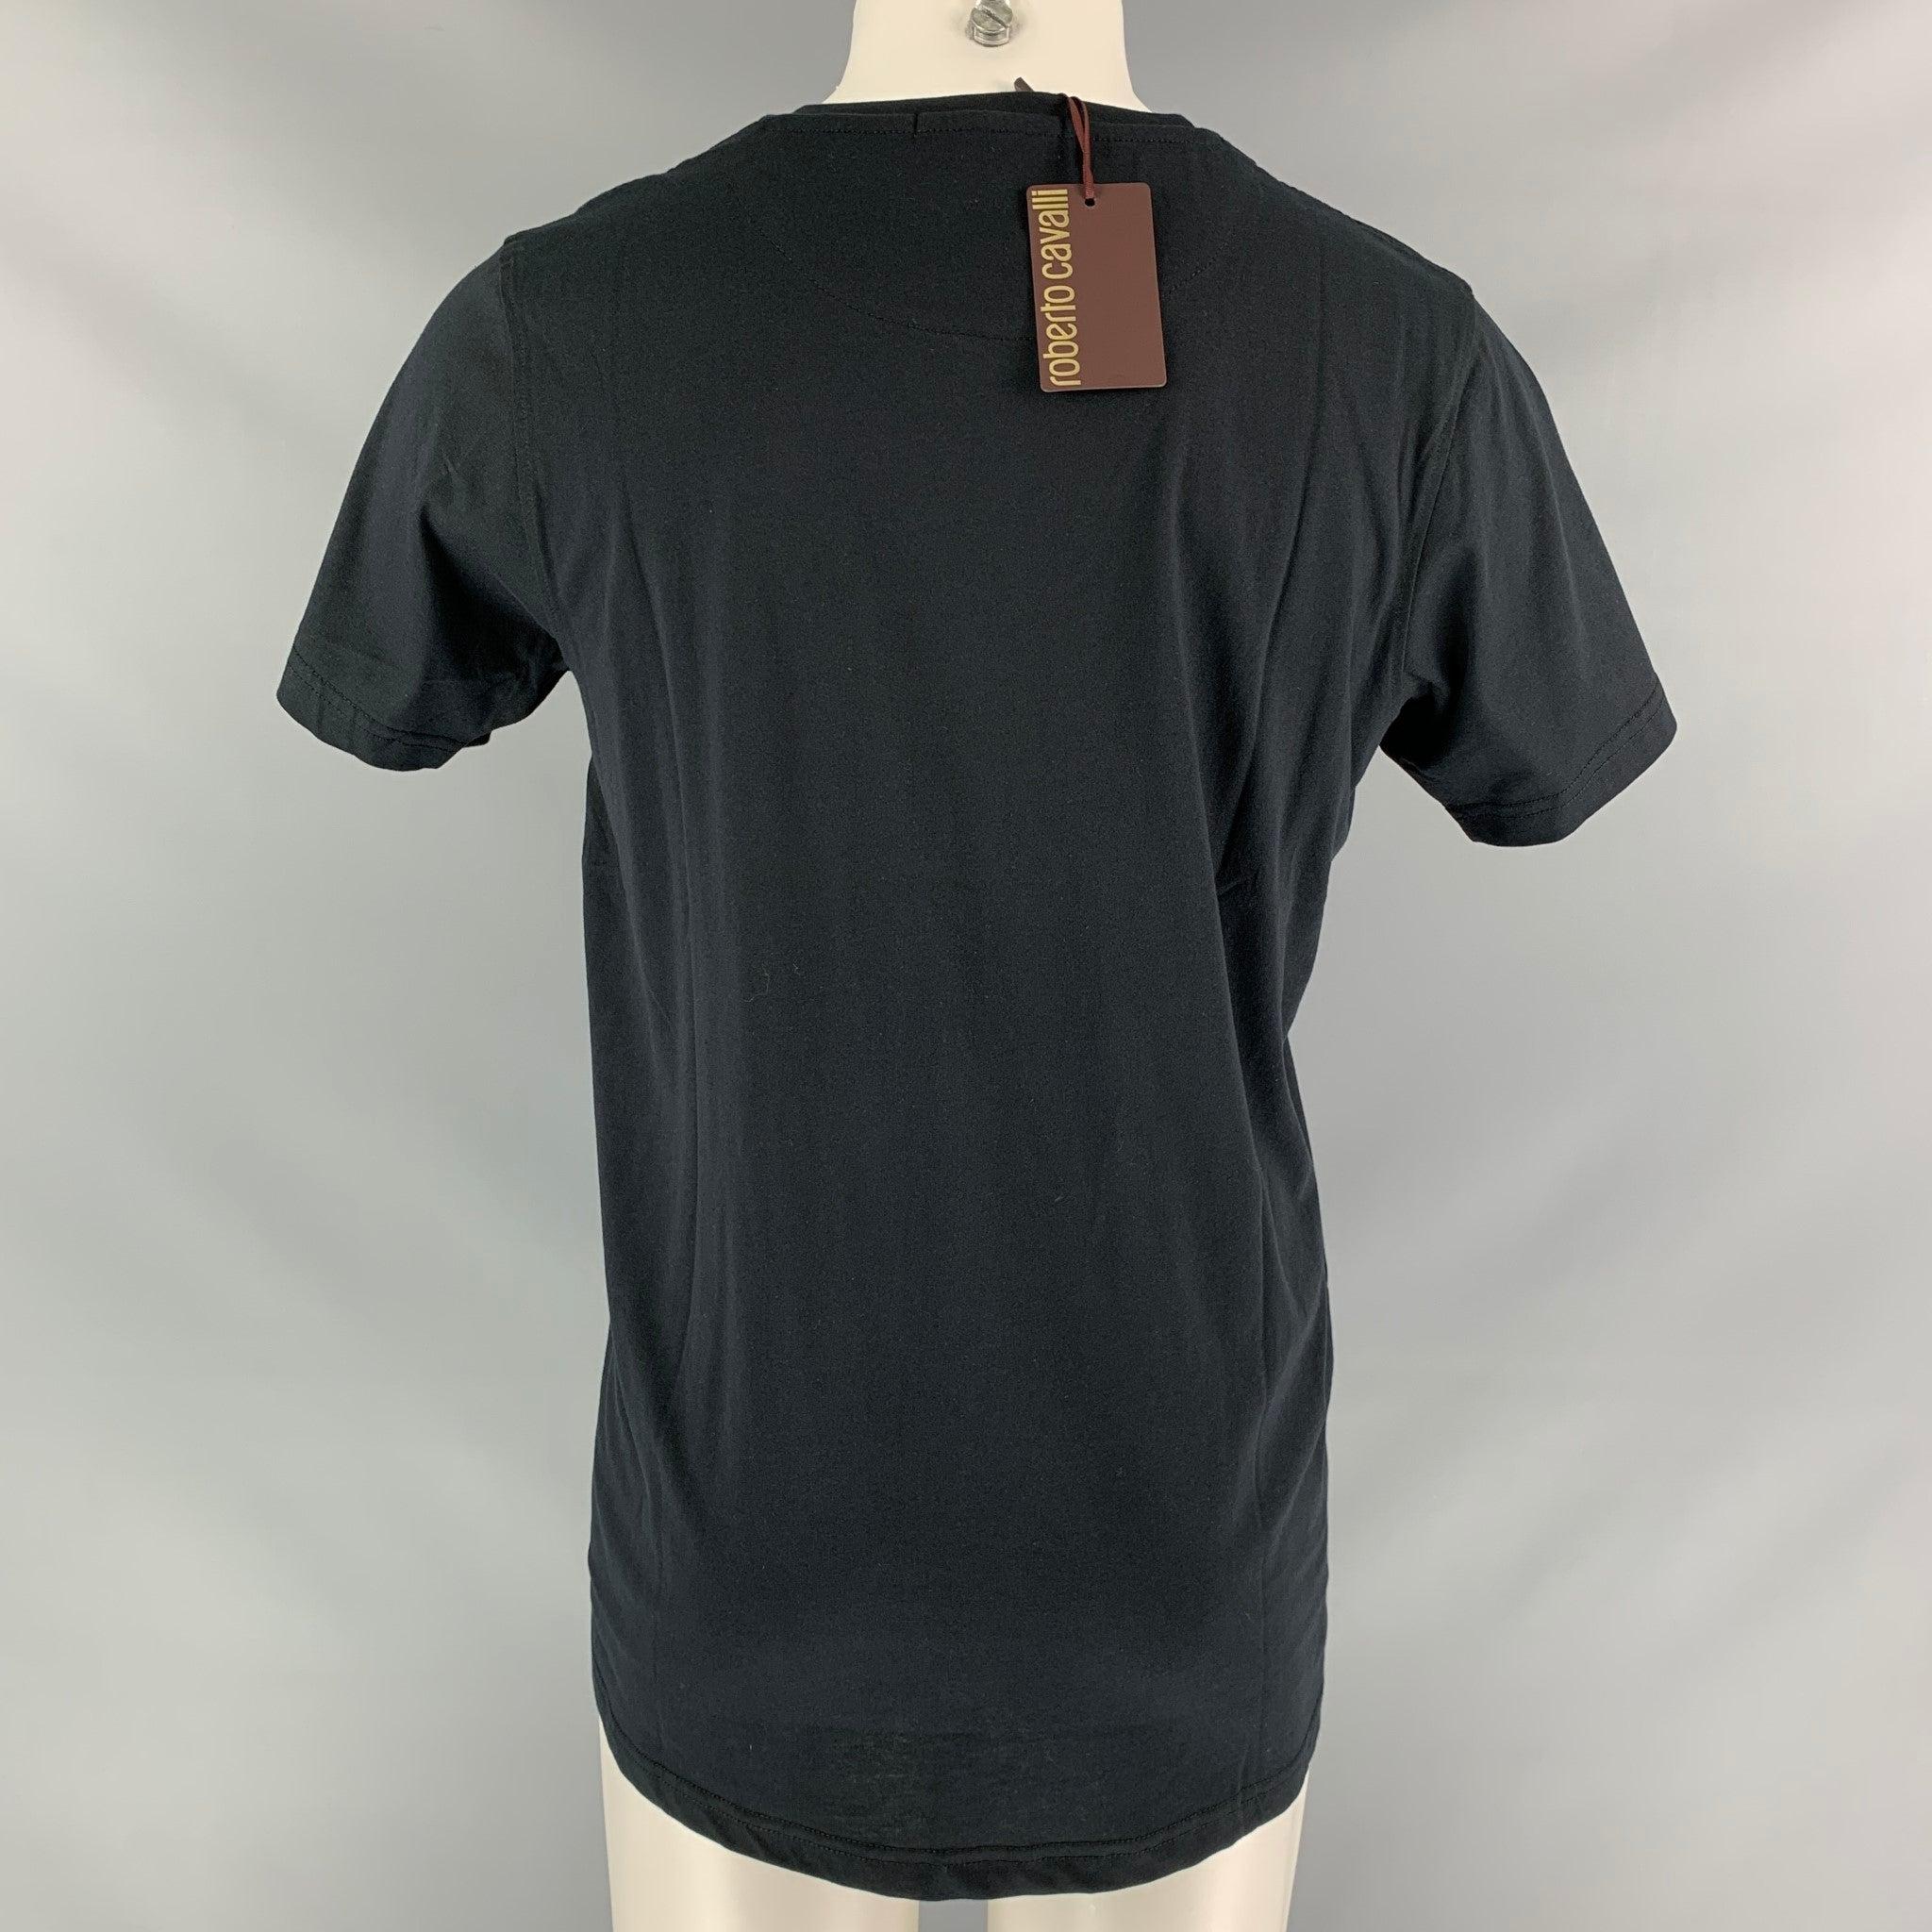 ROBERTO CAVALLI short sleeve t-shirt comes in black cotton, tiger graphic art at center front and a round collar. New with Tag. 
 

 Marked:  M 
 

 Measurements: 
  
 Shoulder: 16.5 inChest: 41 inSleeve: 8 inLength: 27 in
 

  
  
  
 Sui Generis